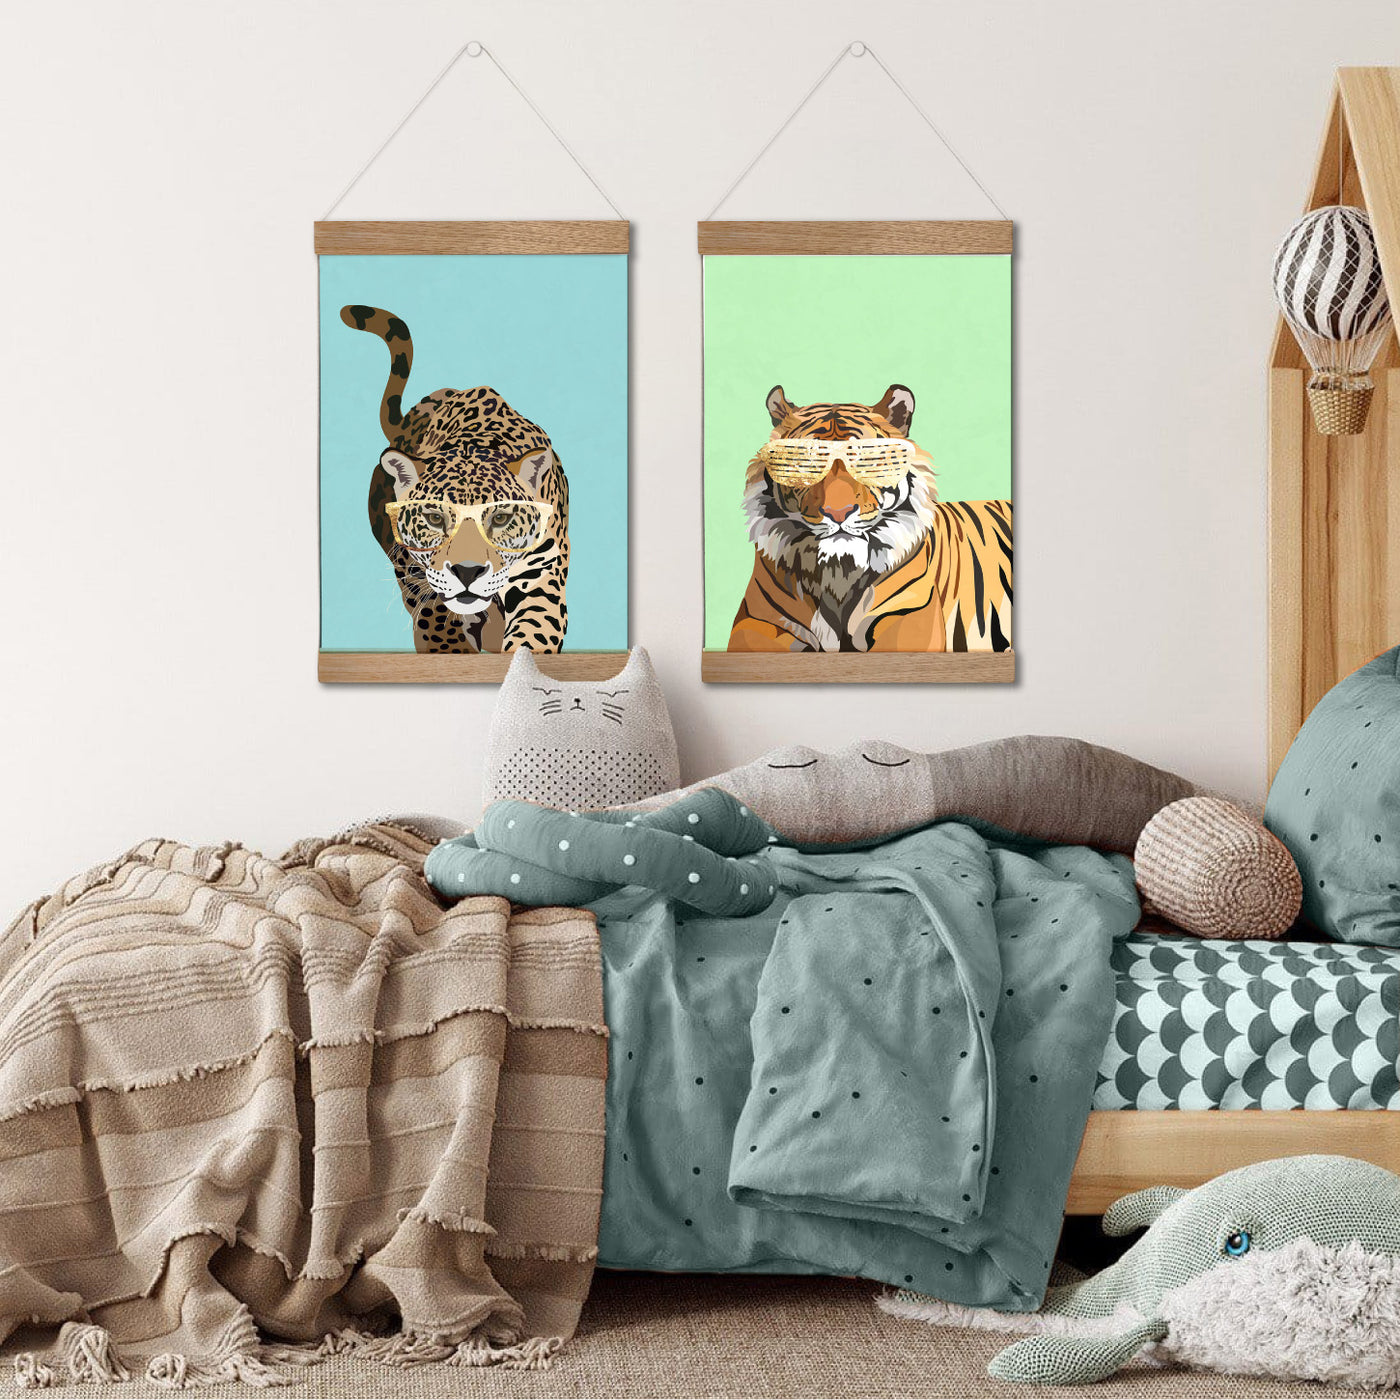 Leopard Pop - Art Print, Poster, Stretched Canvas or Framed Wall Art, shown framed in a home interior space